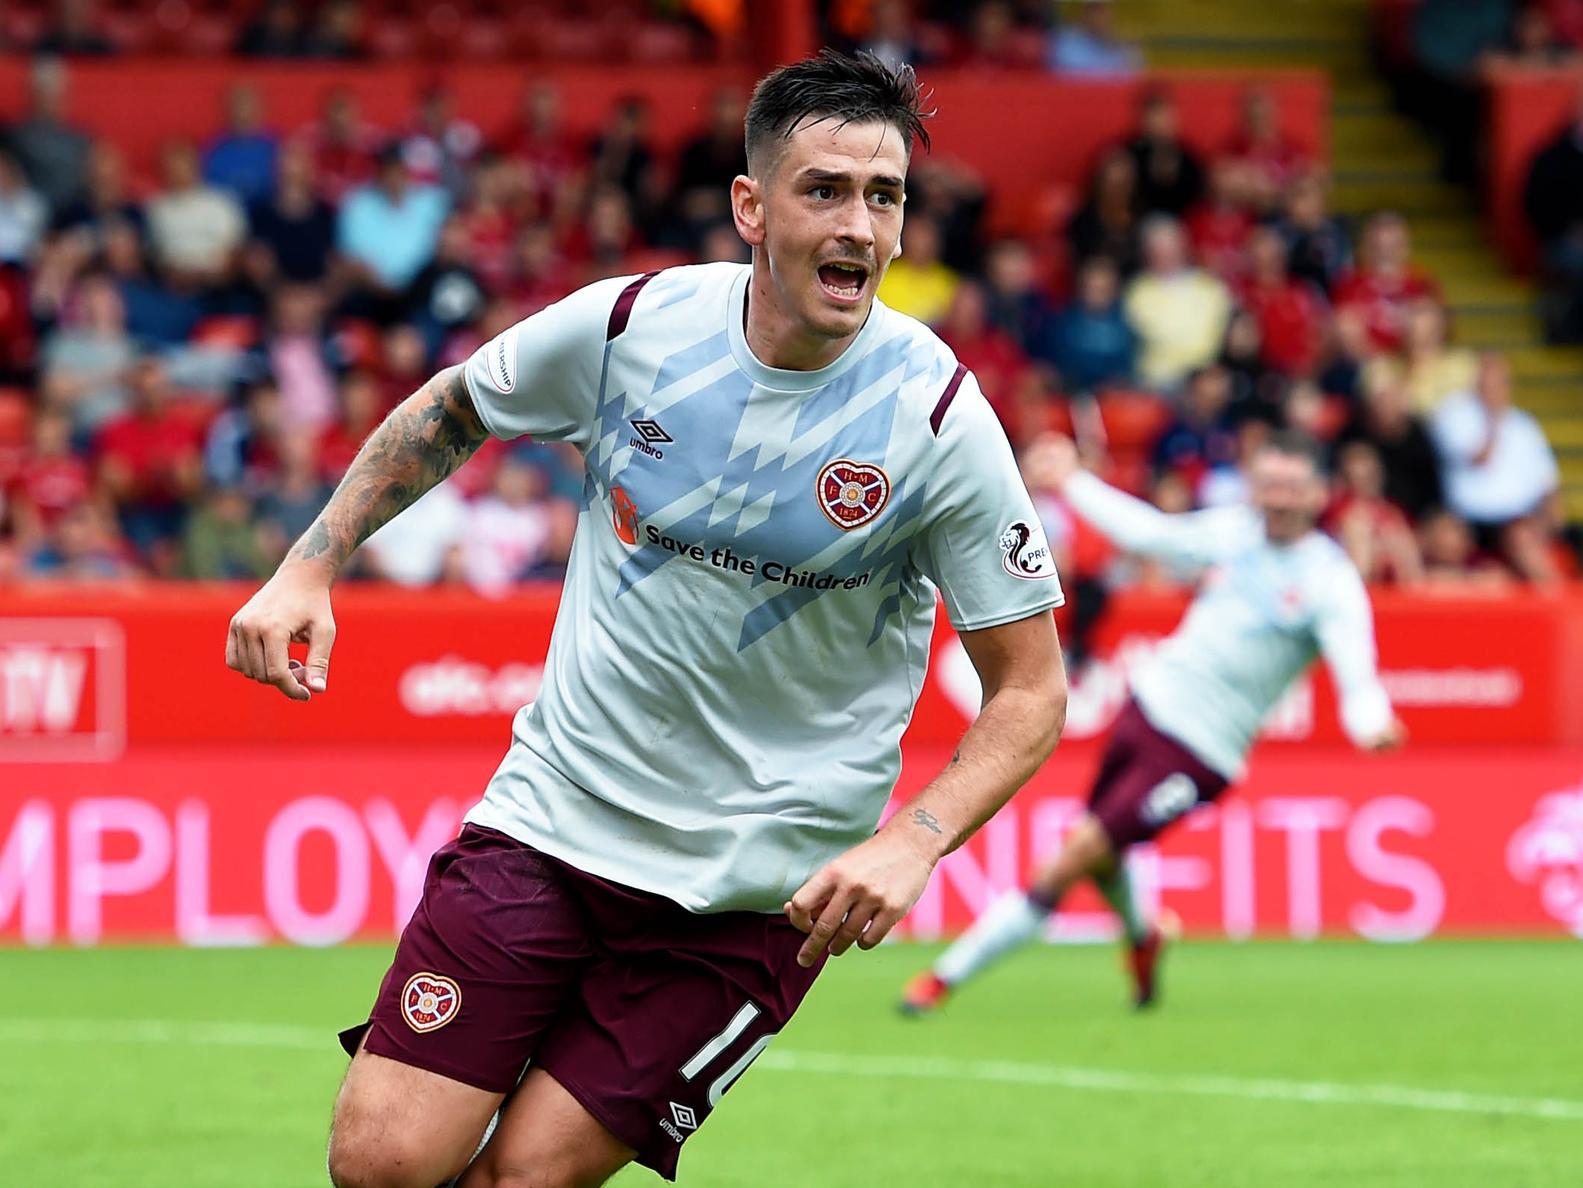 The Hearts player who looked most likely to make something happen but was too often left to plough a lone furrow and often fouled by opponents whenever generating any momentum.